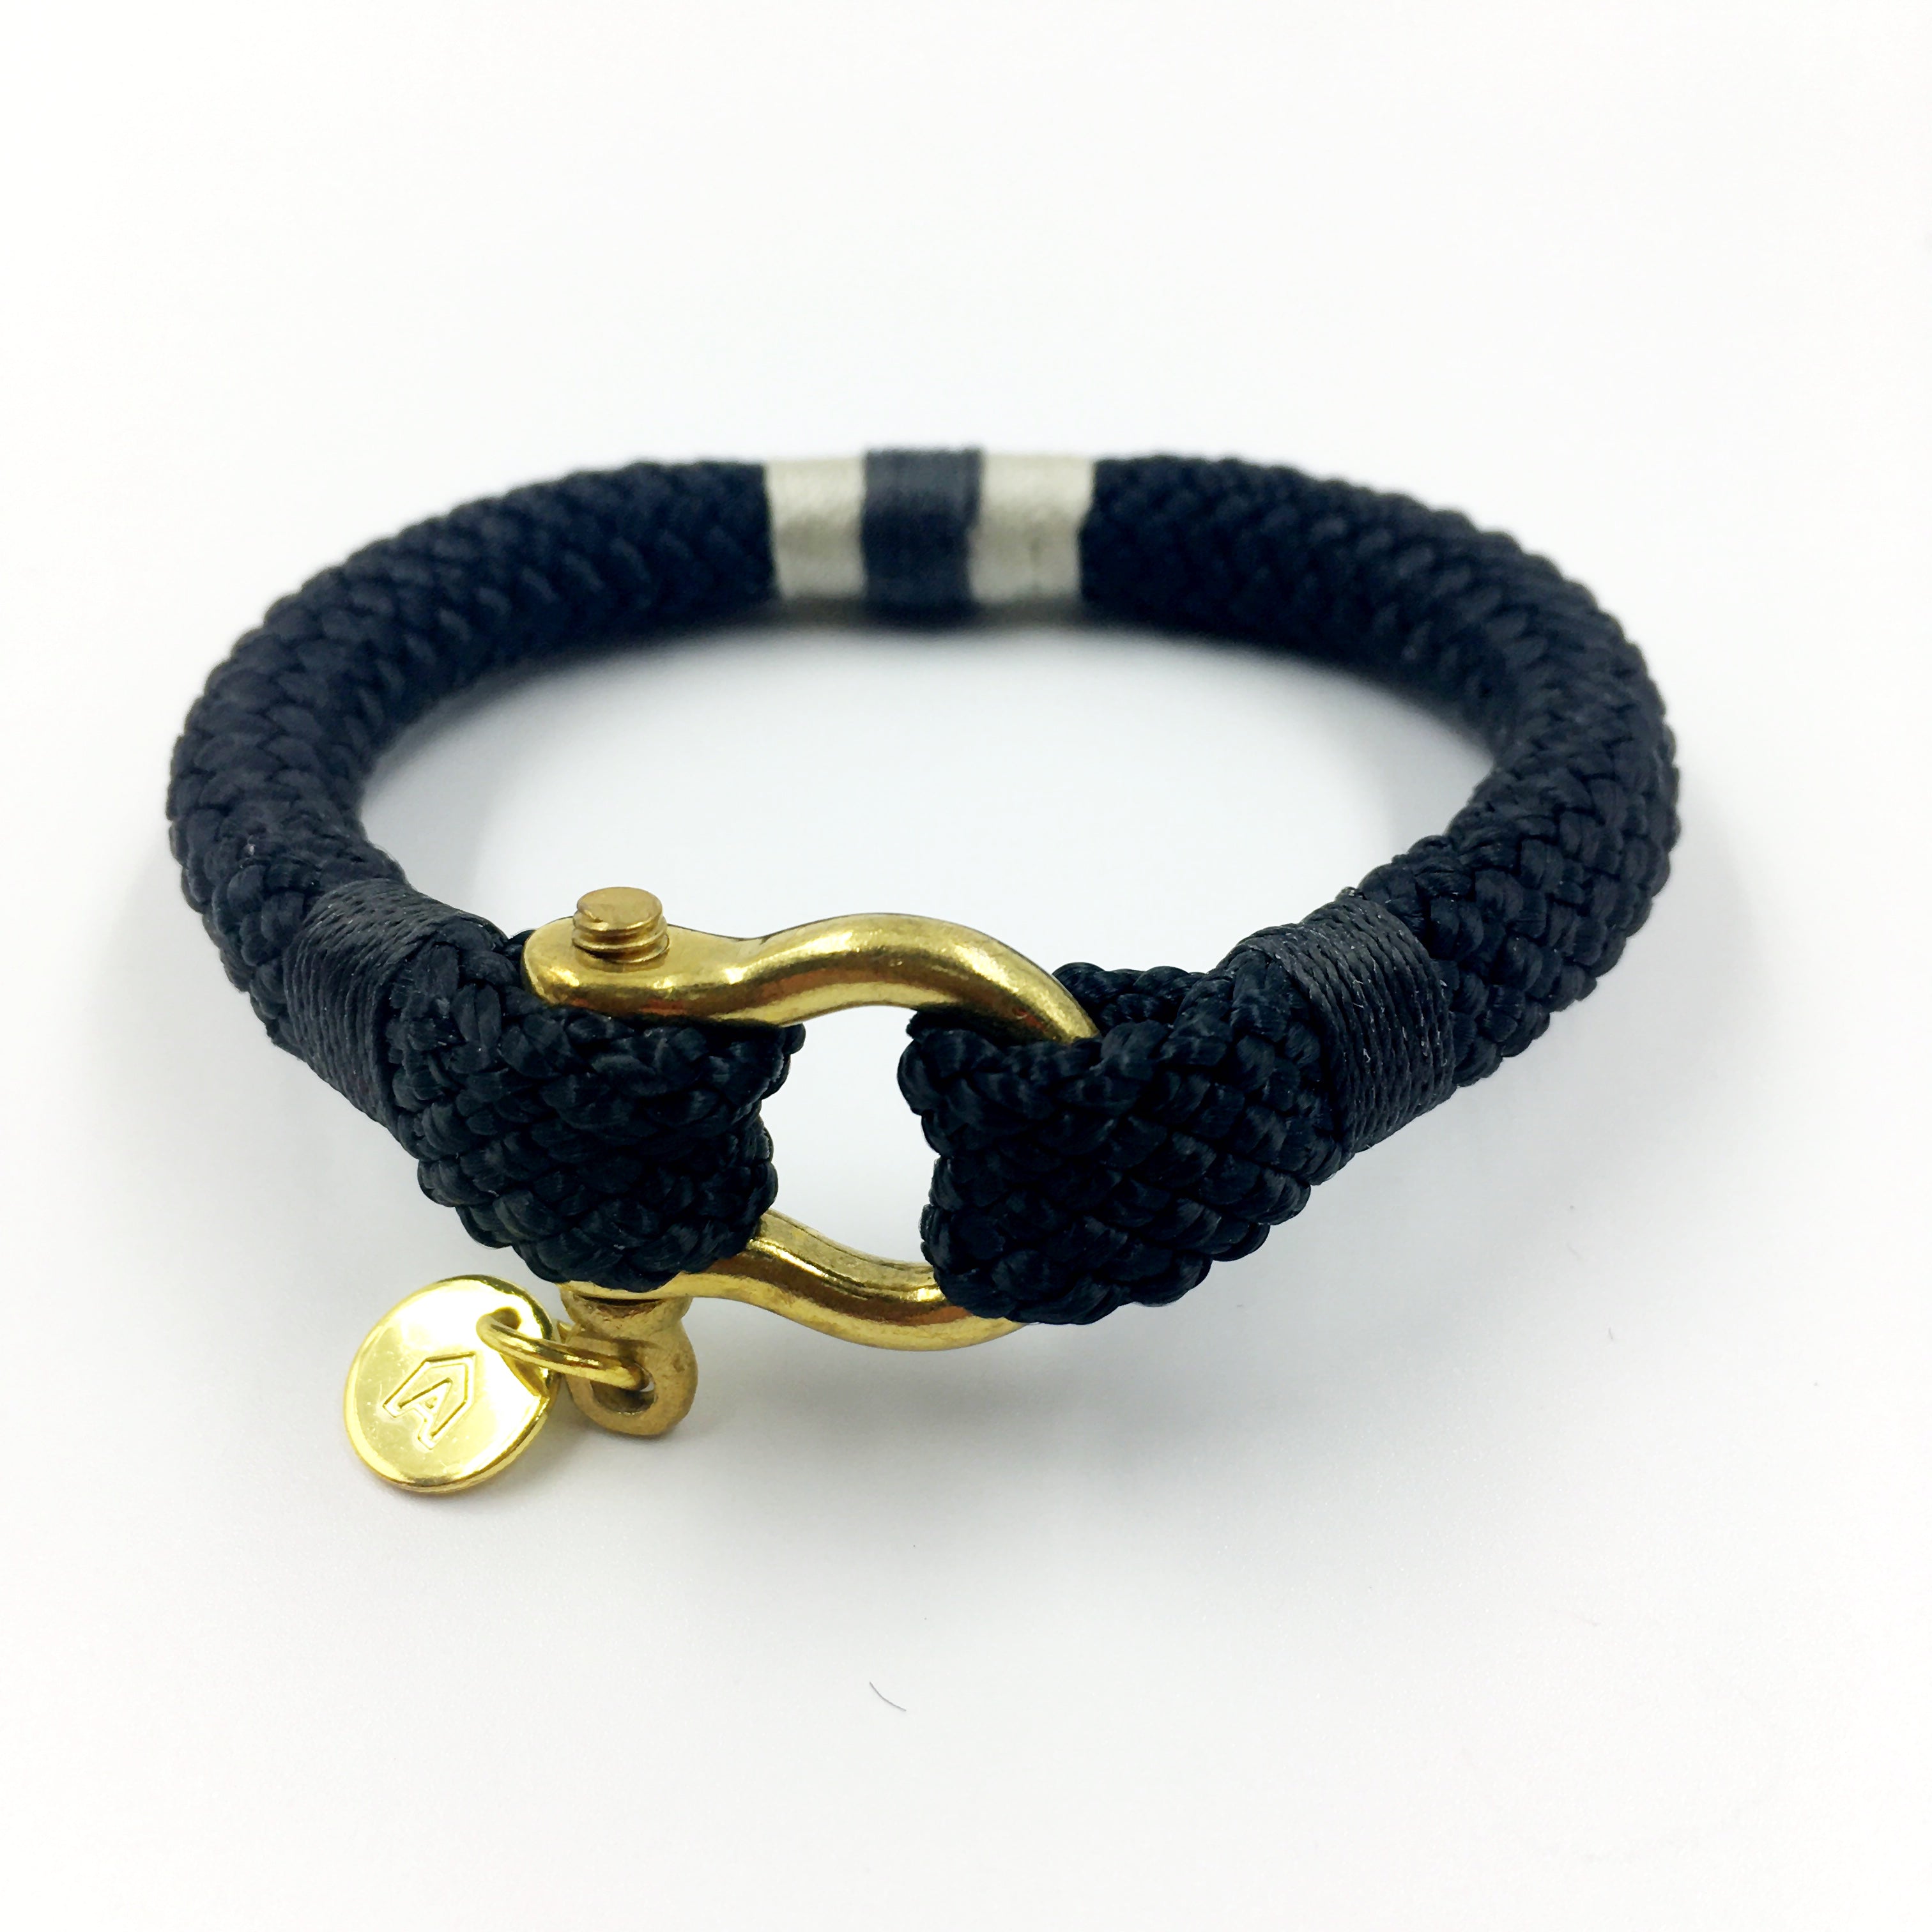 Perfect gifts for men.  Gifts for Dads. Luxury rope bracelets made with tough marine rope and solid brass clasp